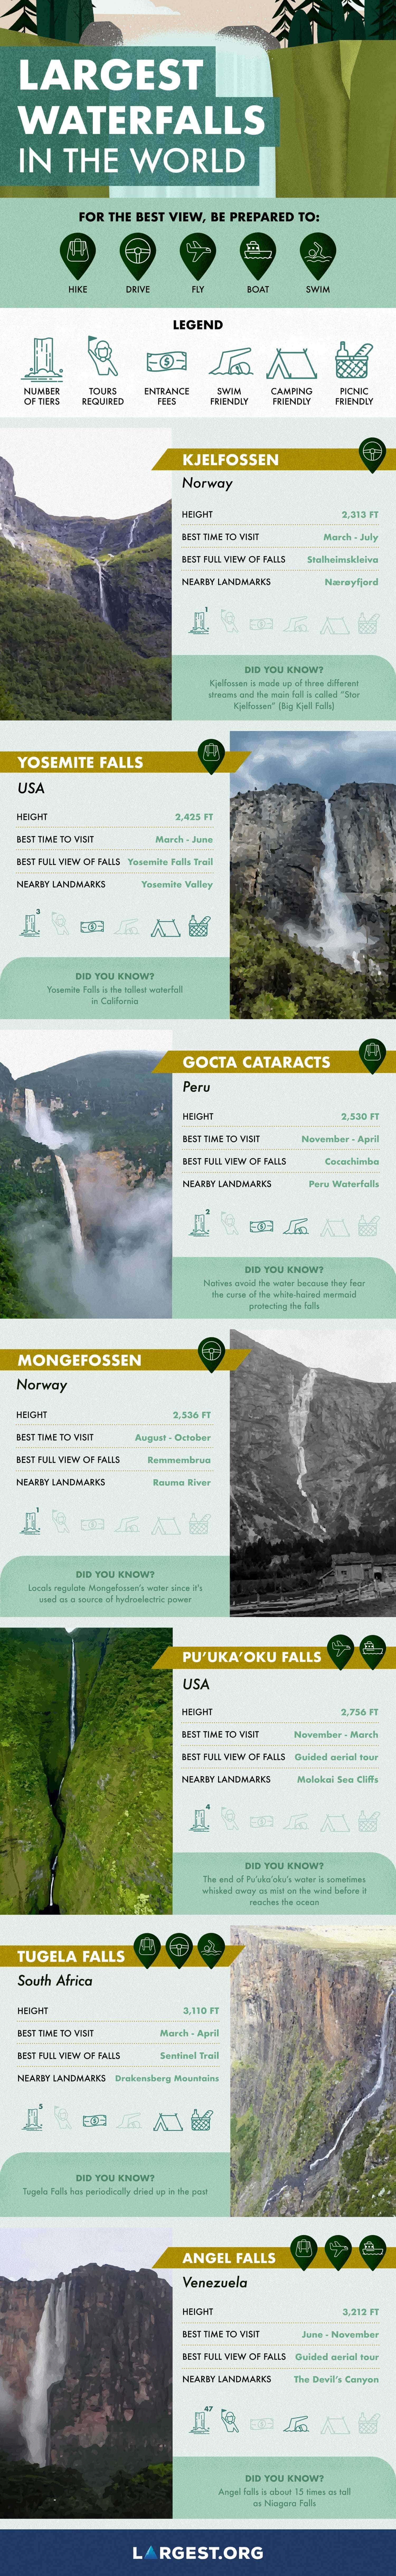 largest waterfalls infographic